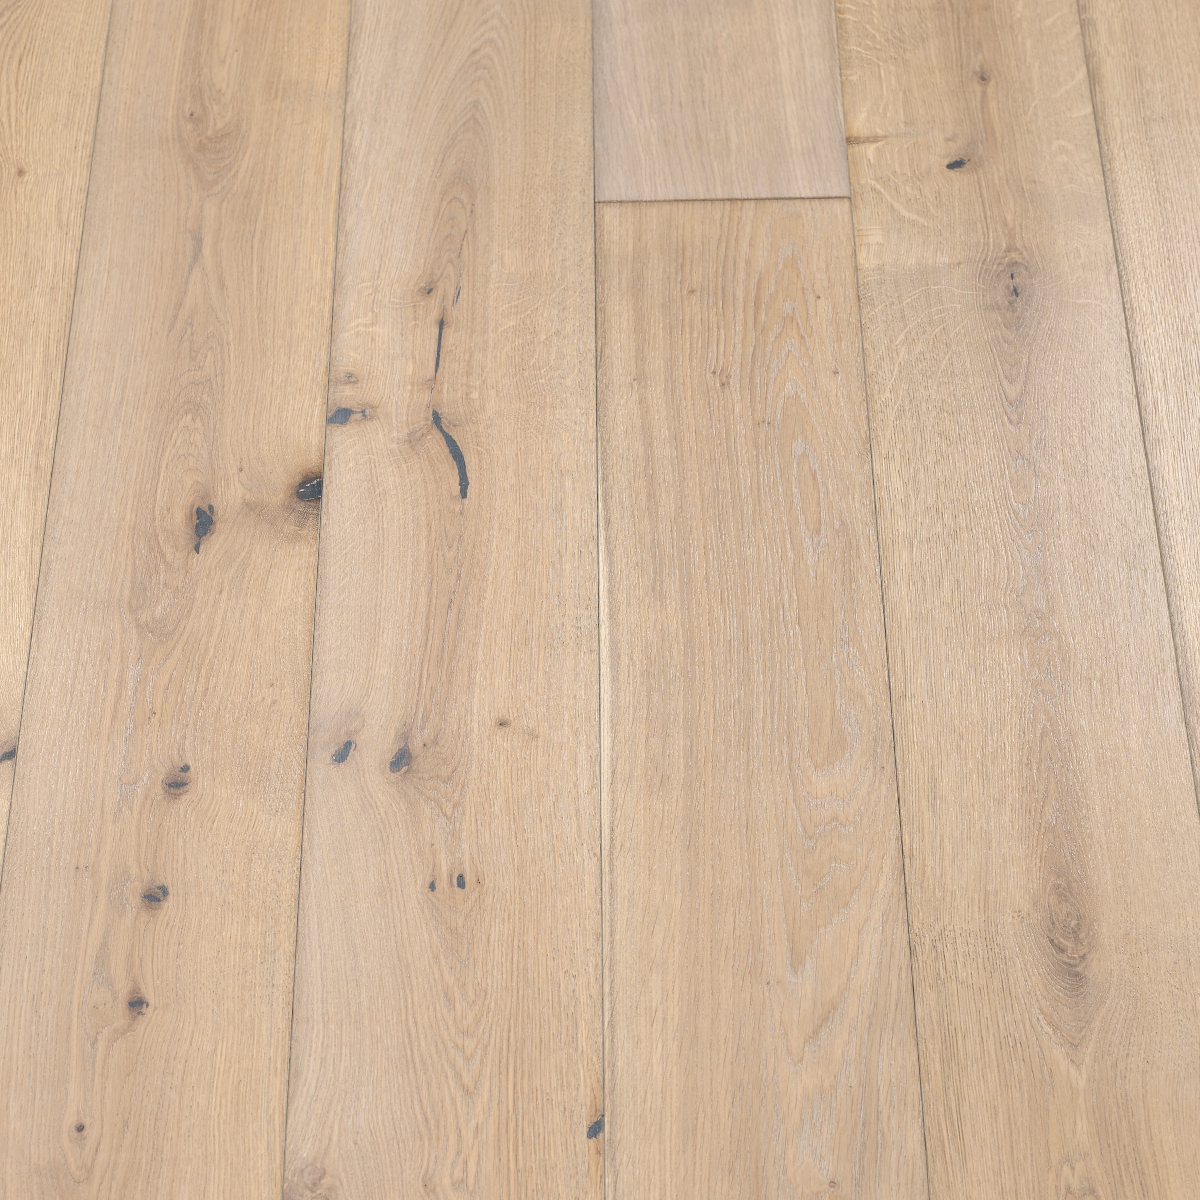 Classic Coral Wood Flooring - image featuring a coral-coloured wood flooring with a vibrant and lively hue, adding a pop of colour to any space.